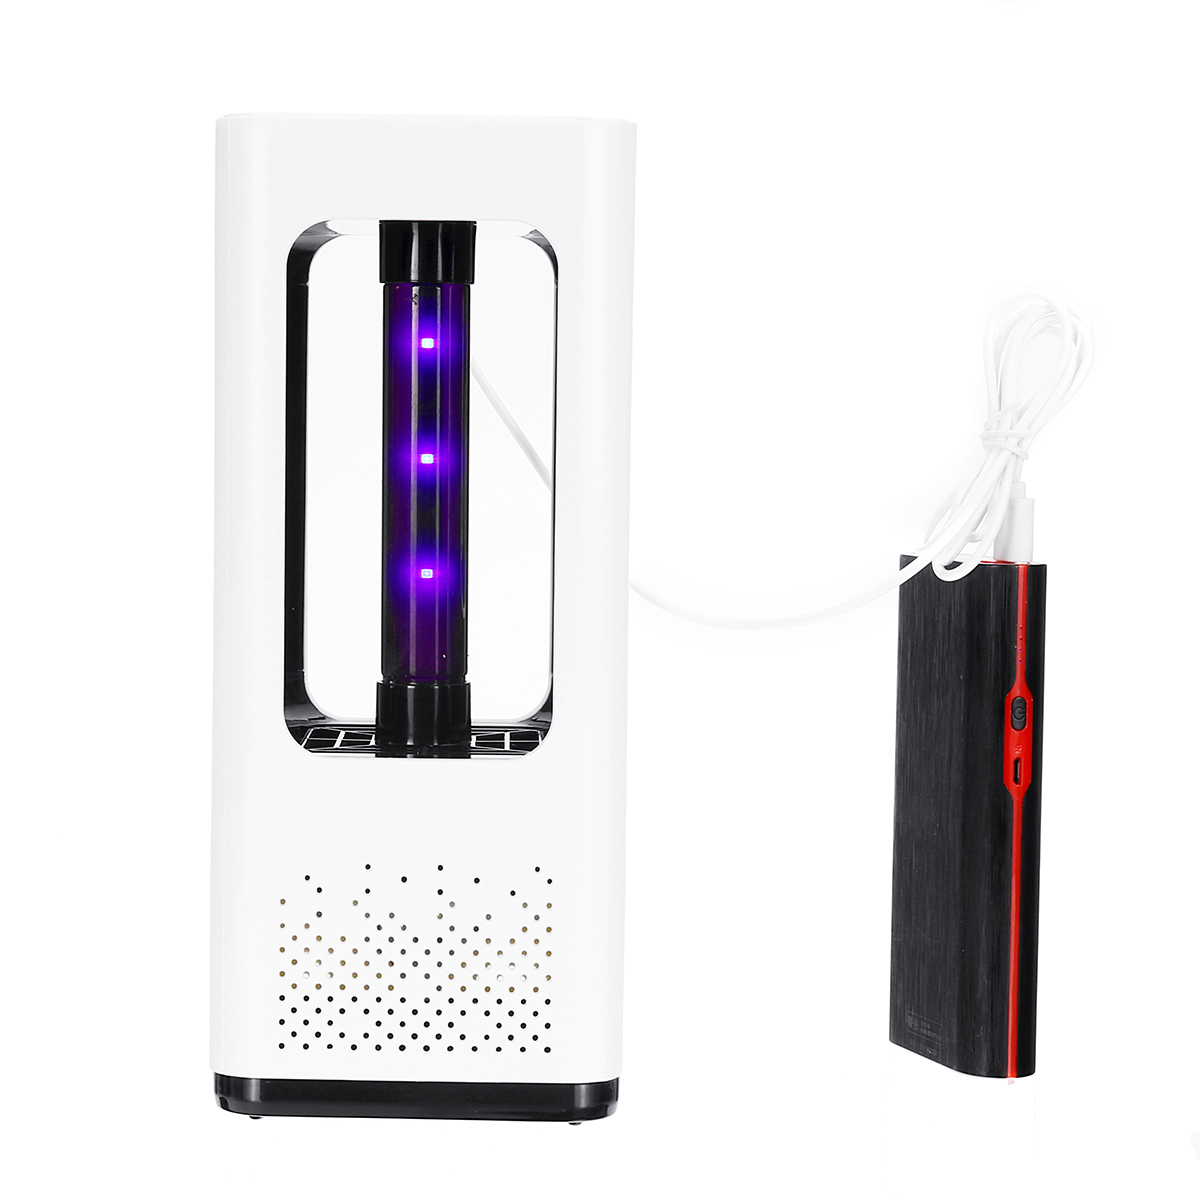 

DC5V 1A 5W ABS 368nm USB Mosquito Dispeller Killer Lamp Indoor Bug Zapper Plug in Electronic LED Light Insect Trap Pest